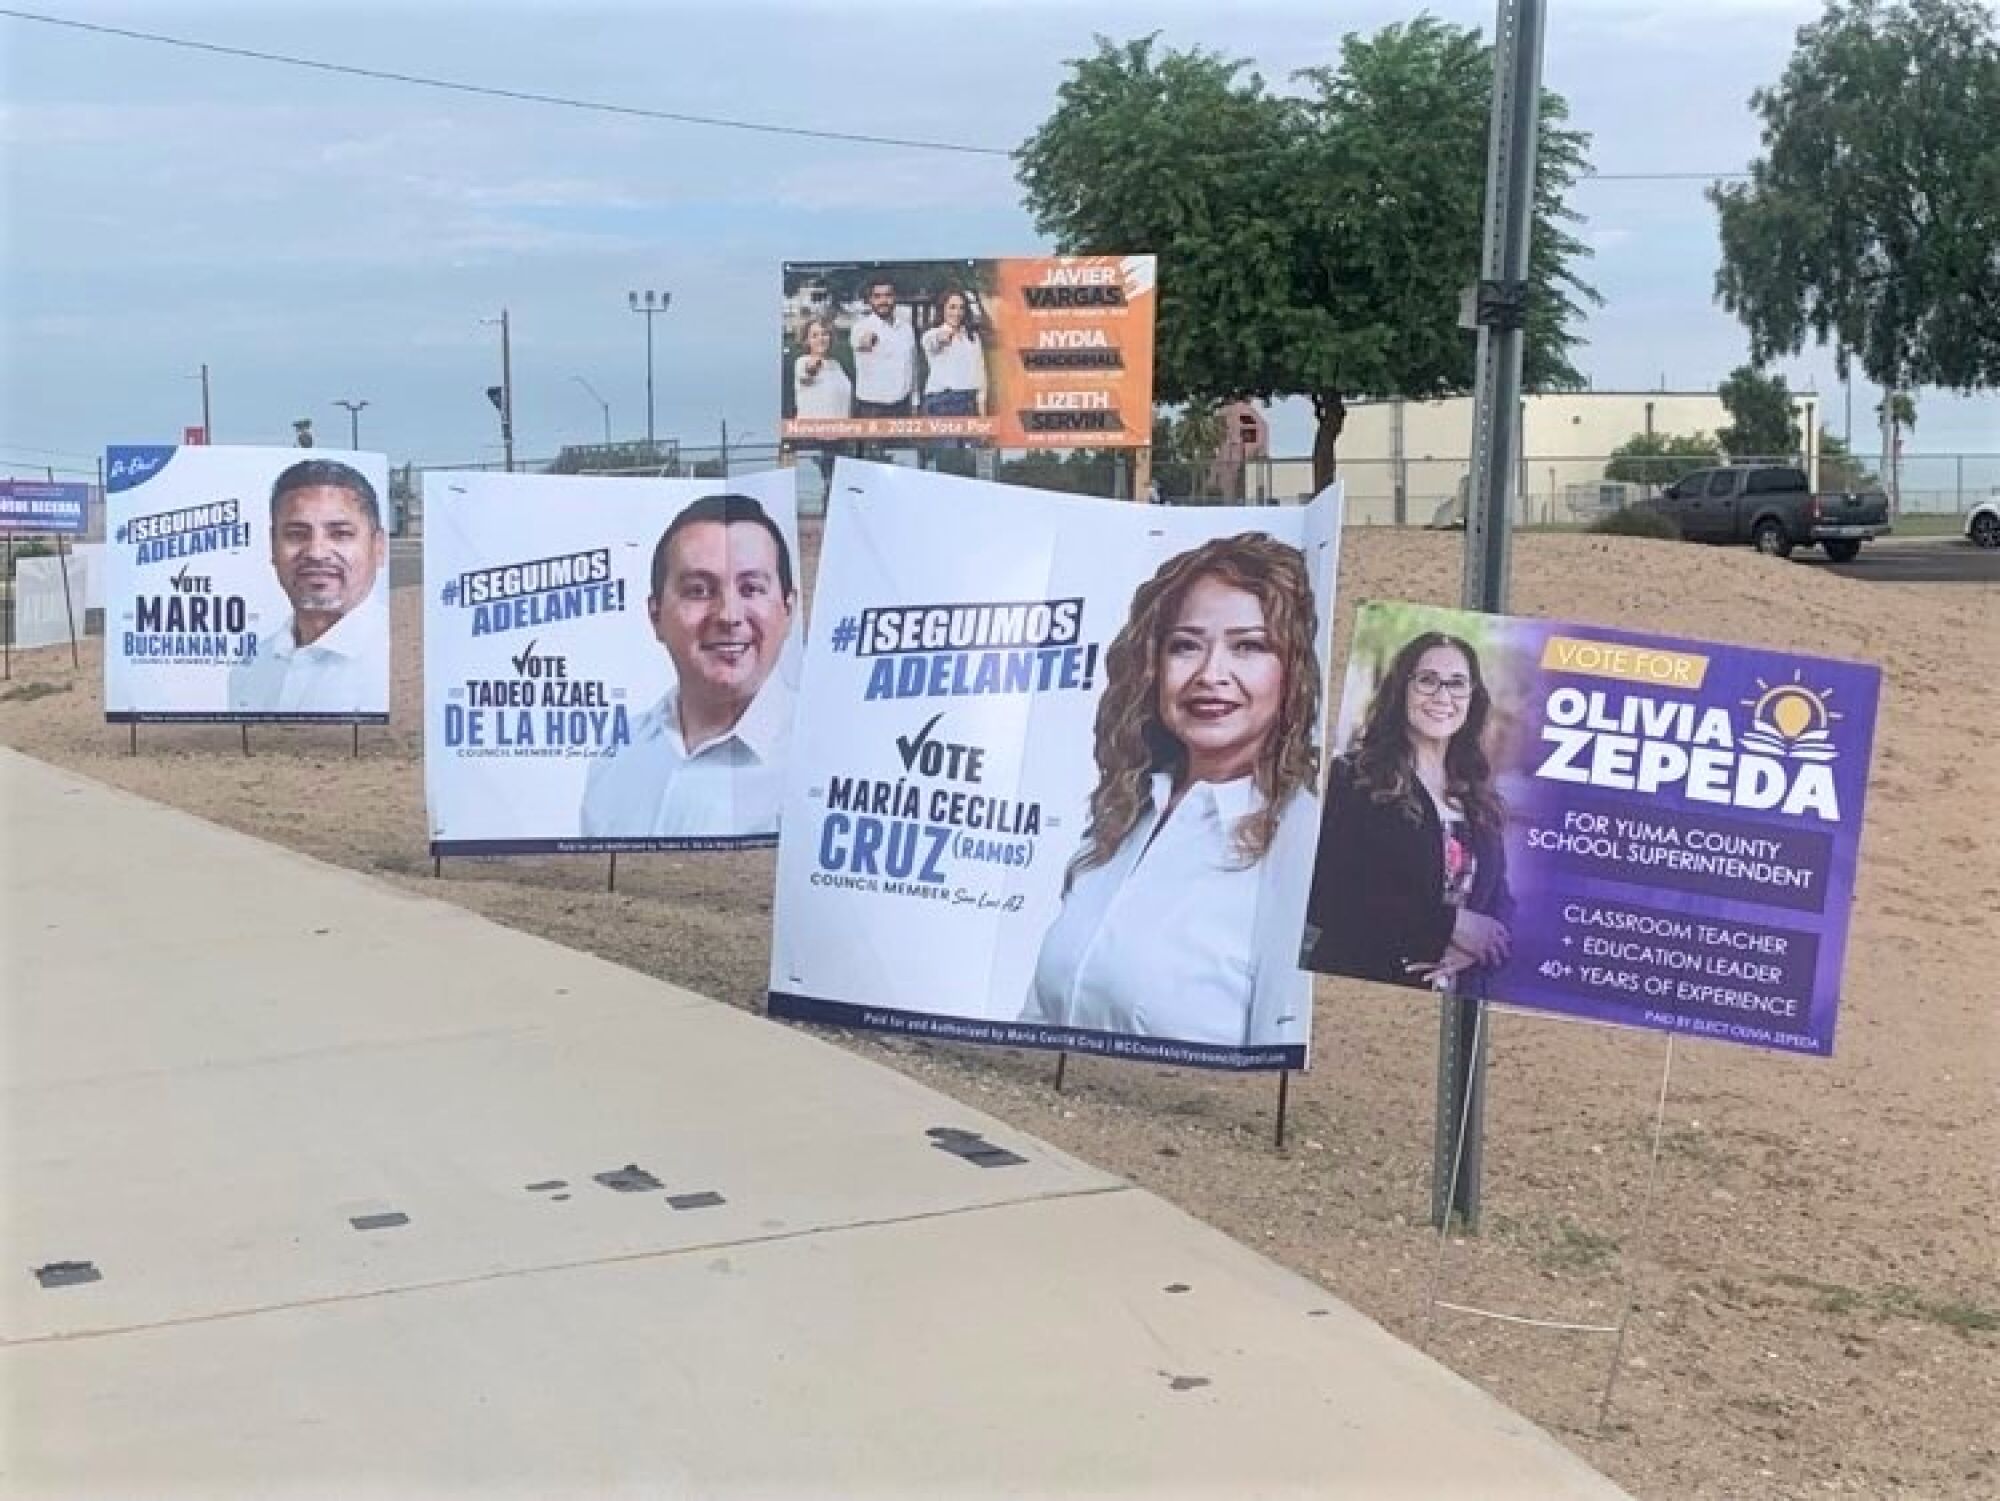 There is a huge electoral buzz on the streets of Yuma County, Arizona